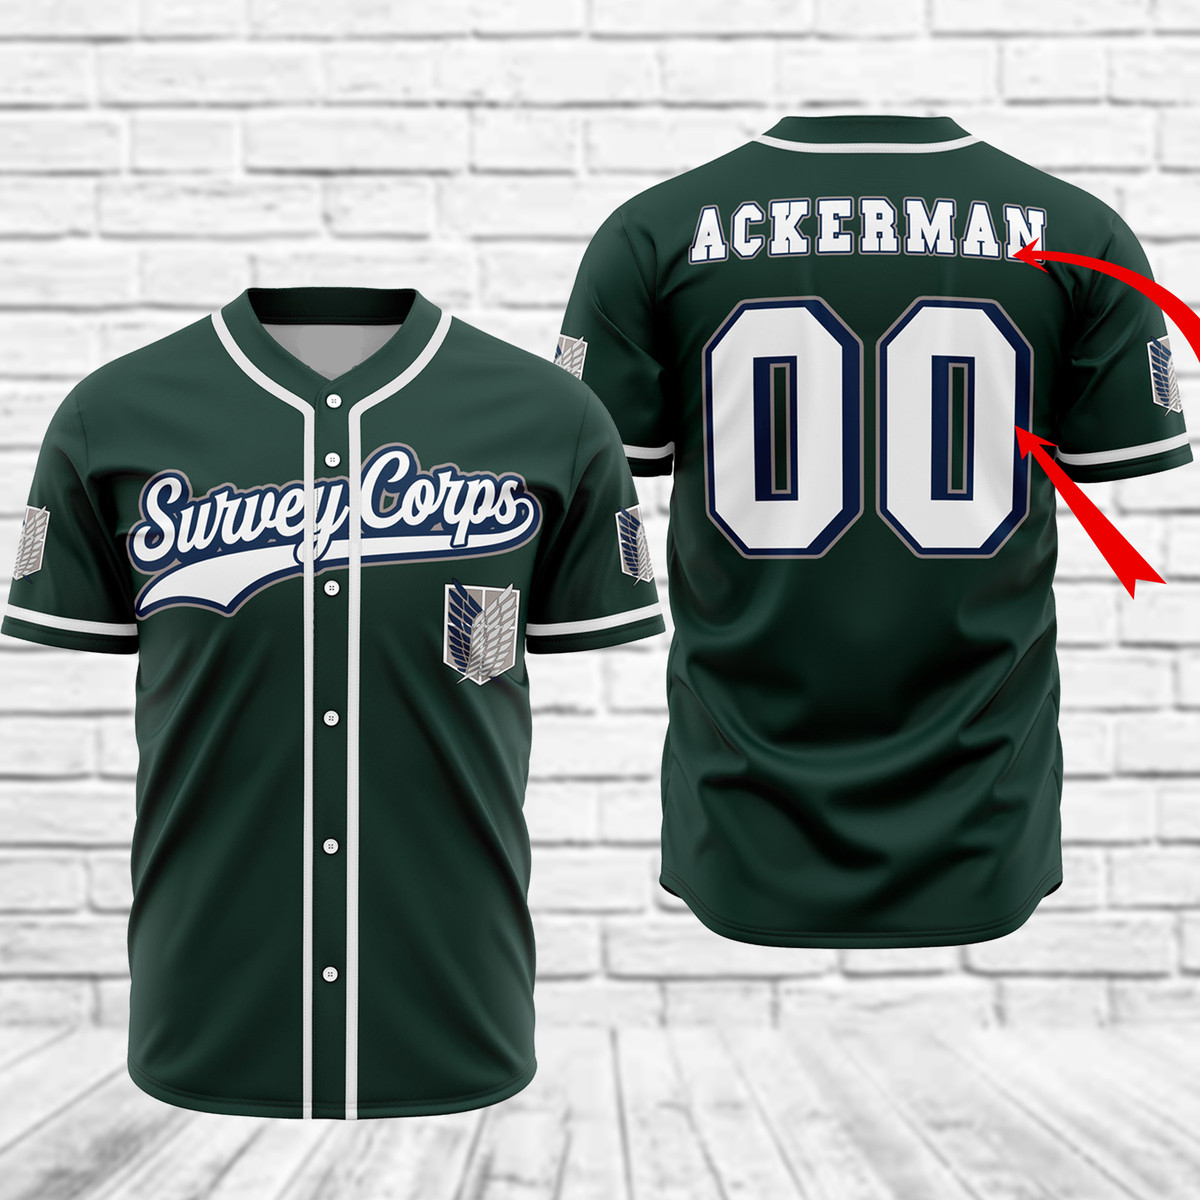 Personalized Survey Corps Attack on Titan Baseball Jersey